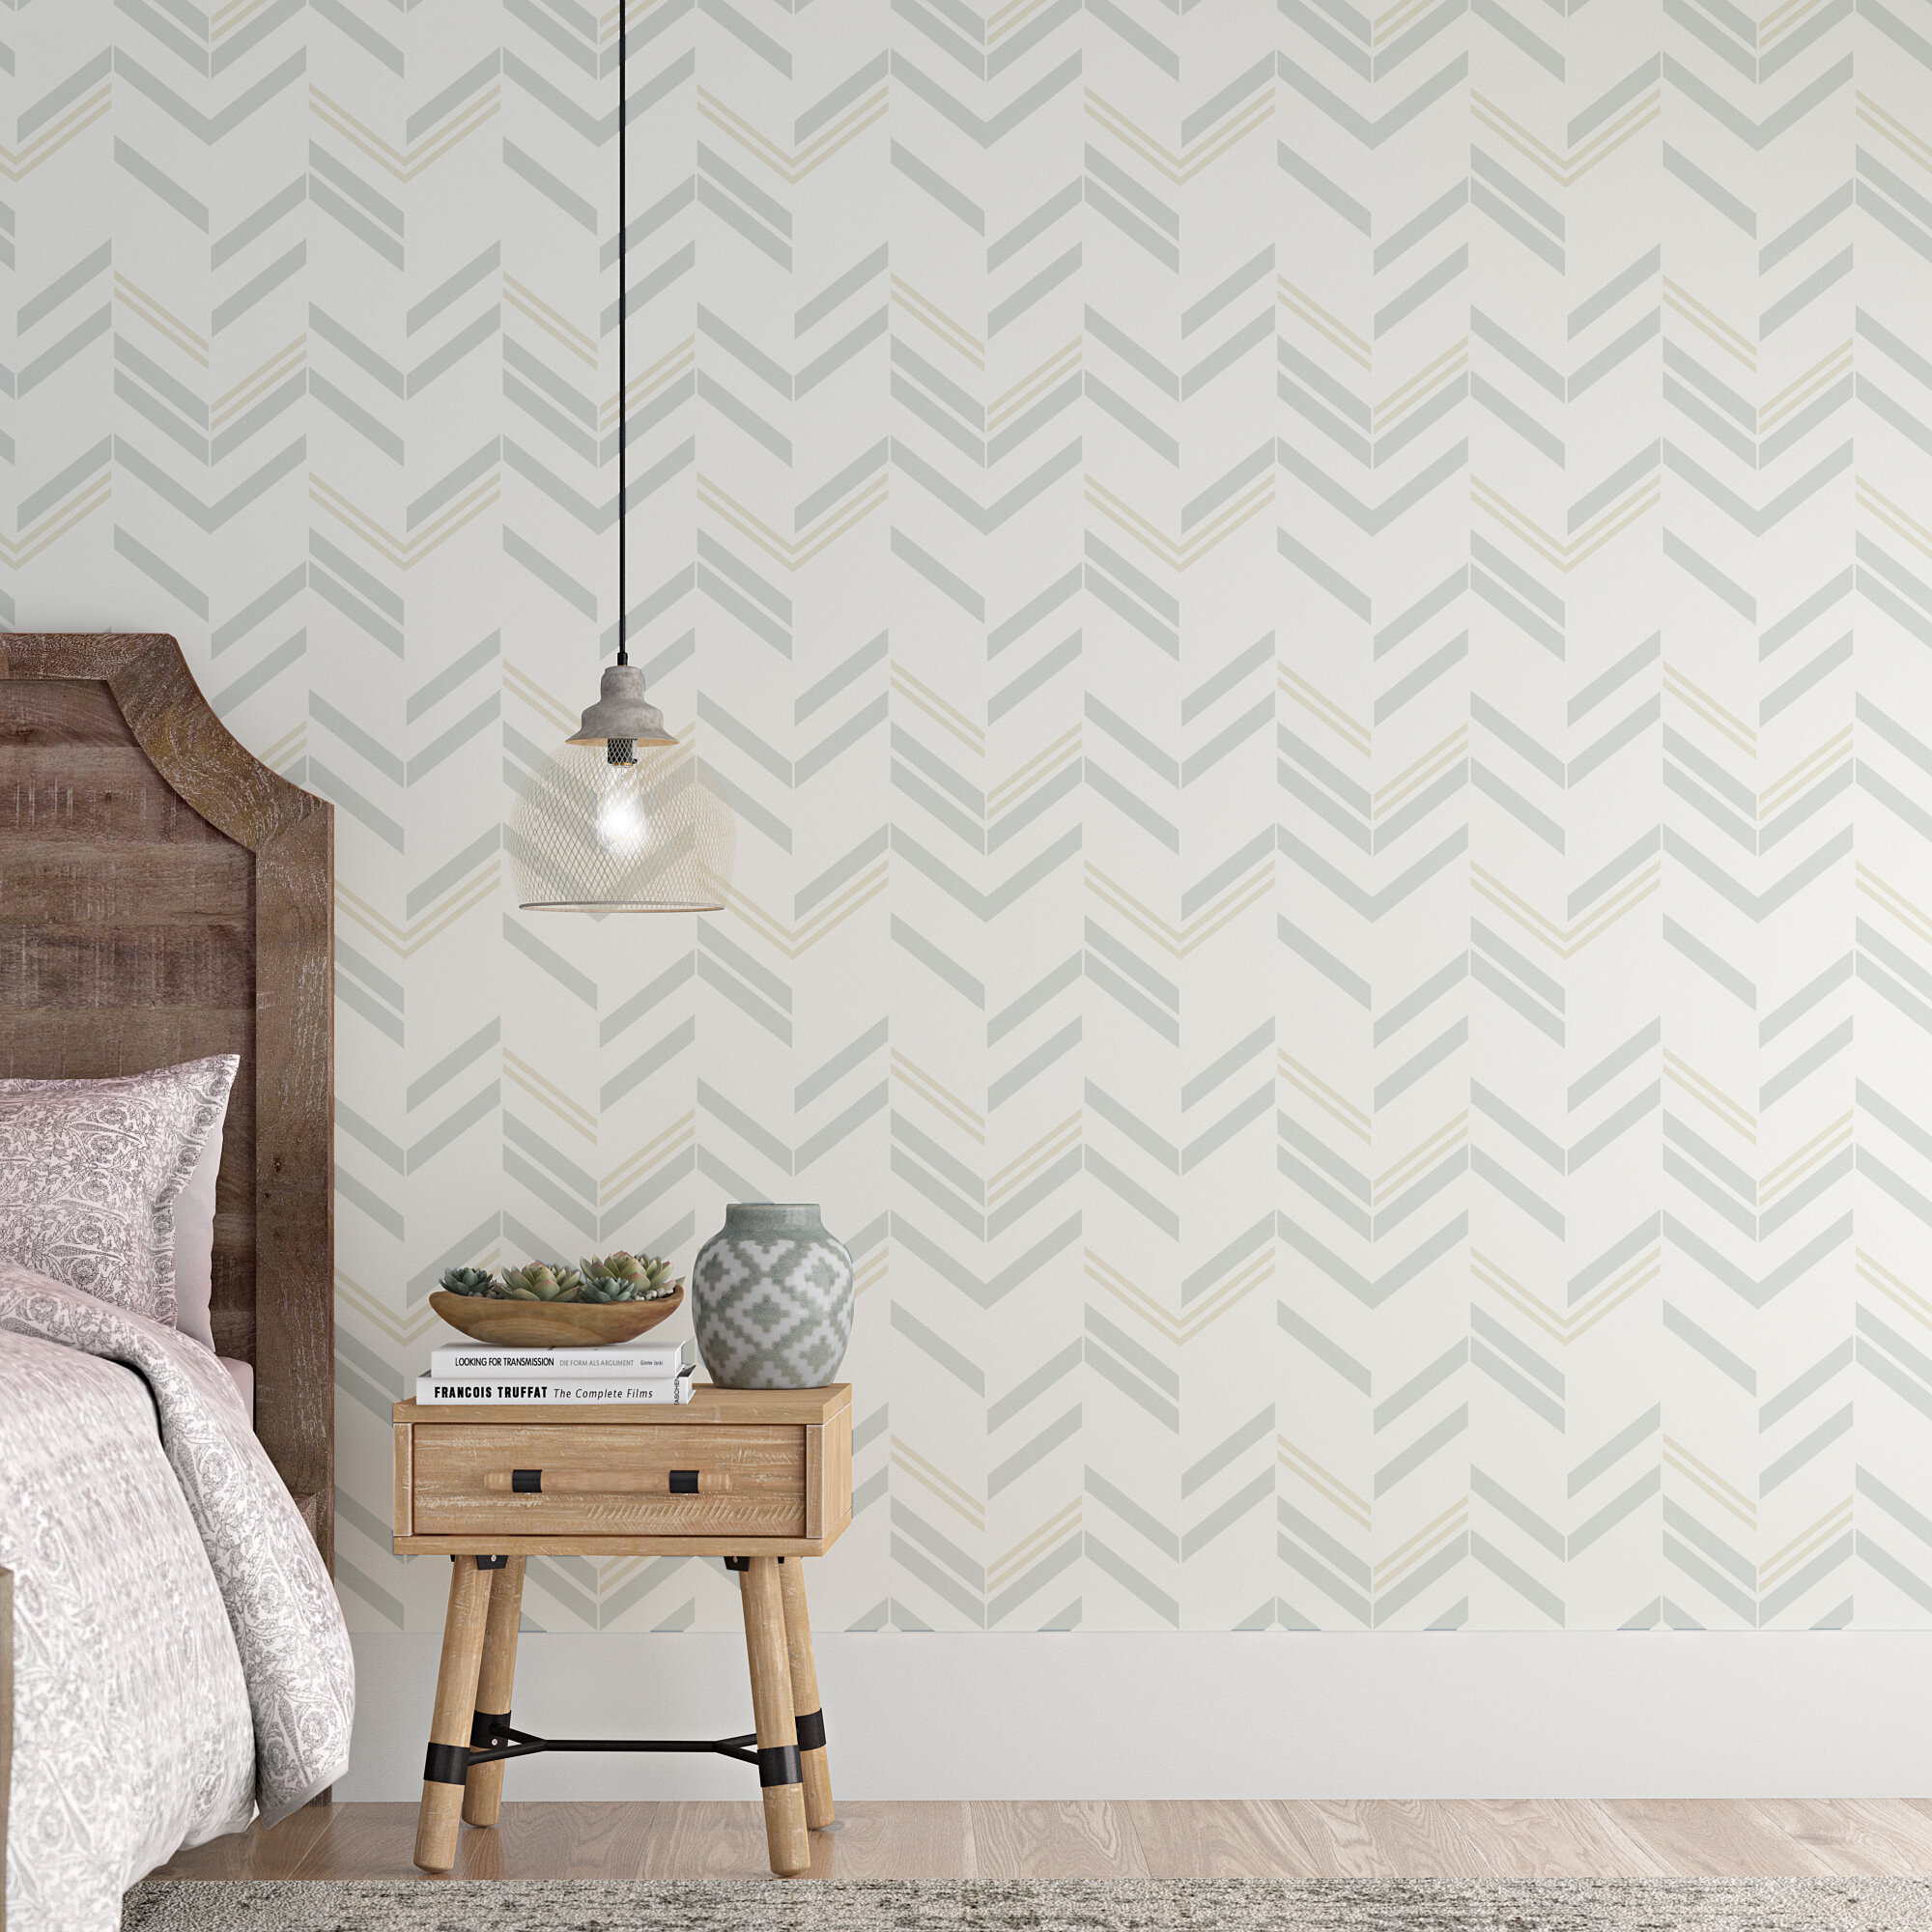 12 Removable Wallpaper Designs Giving Paint a Run for Its Money   Architectural Digest